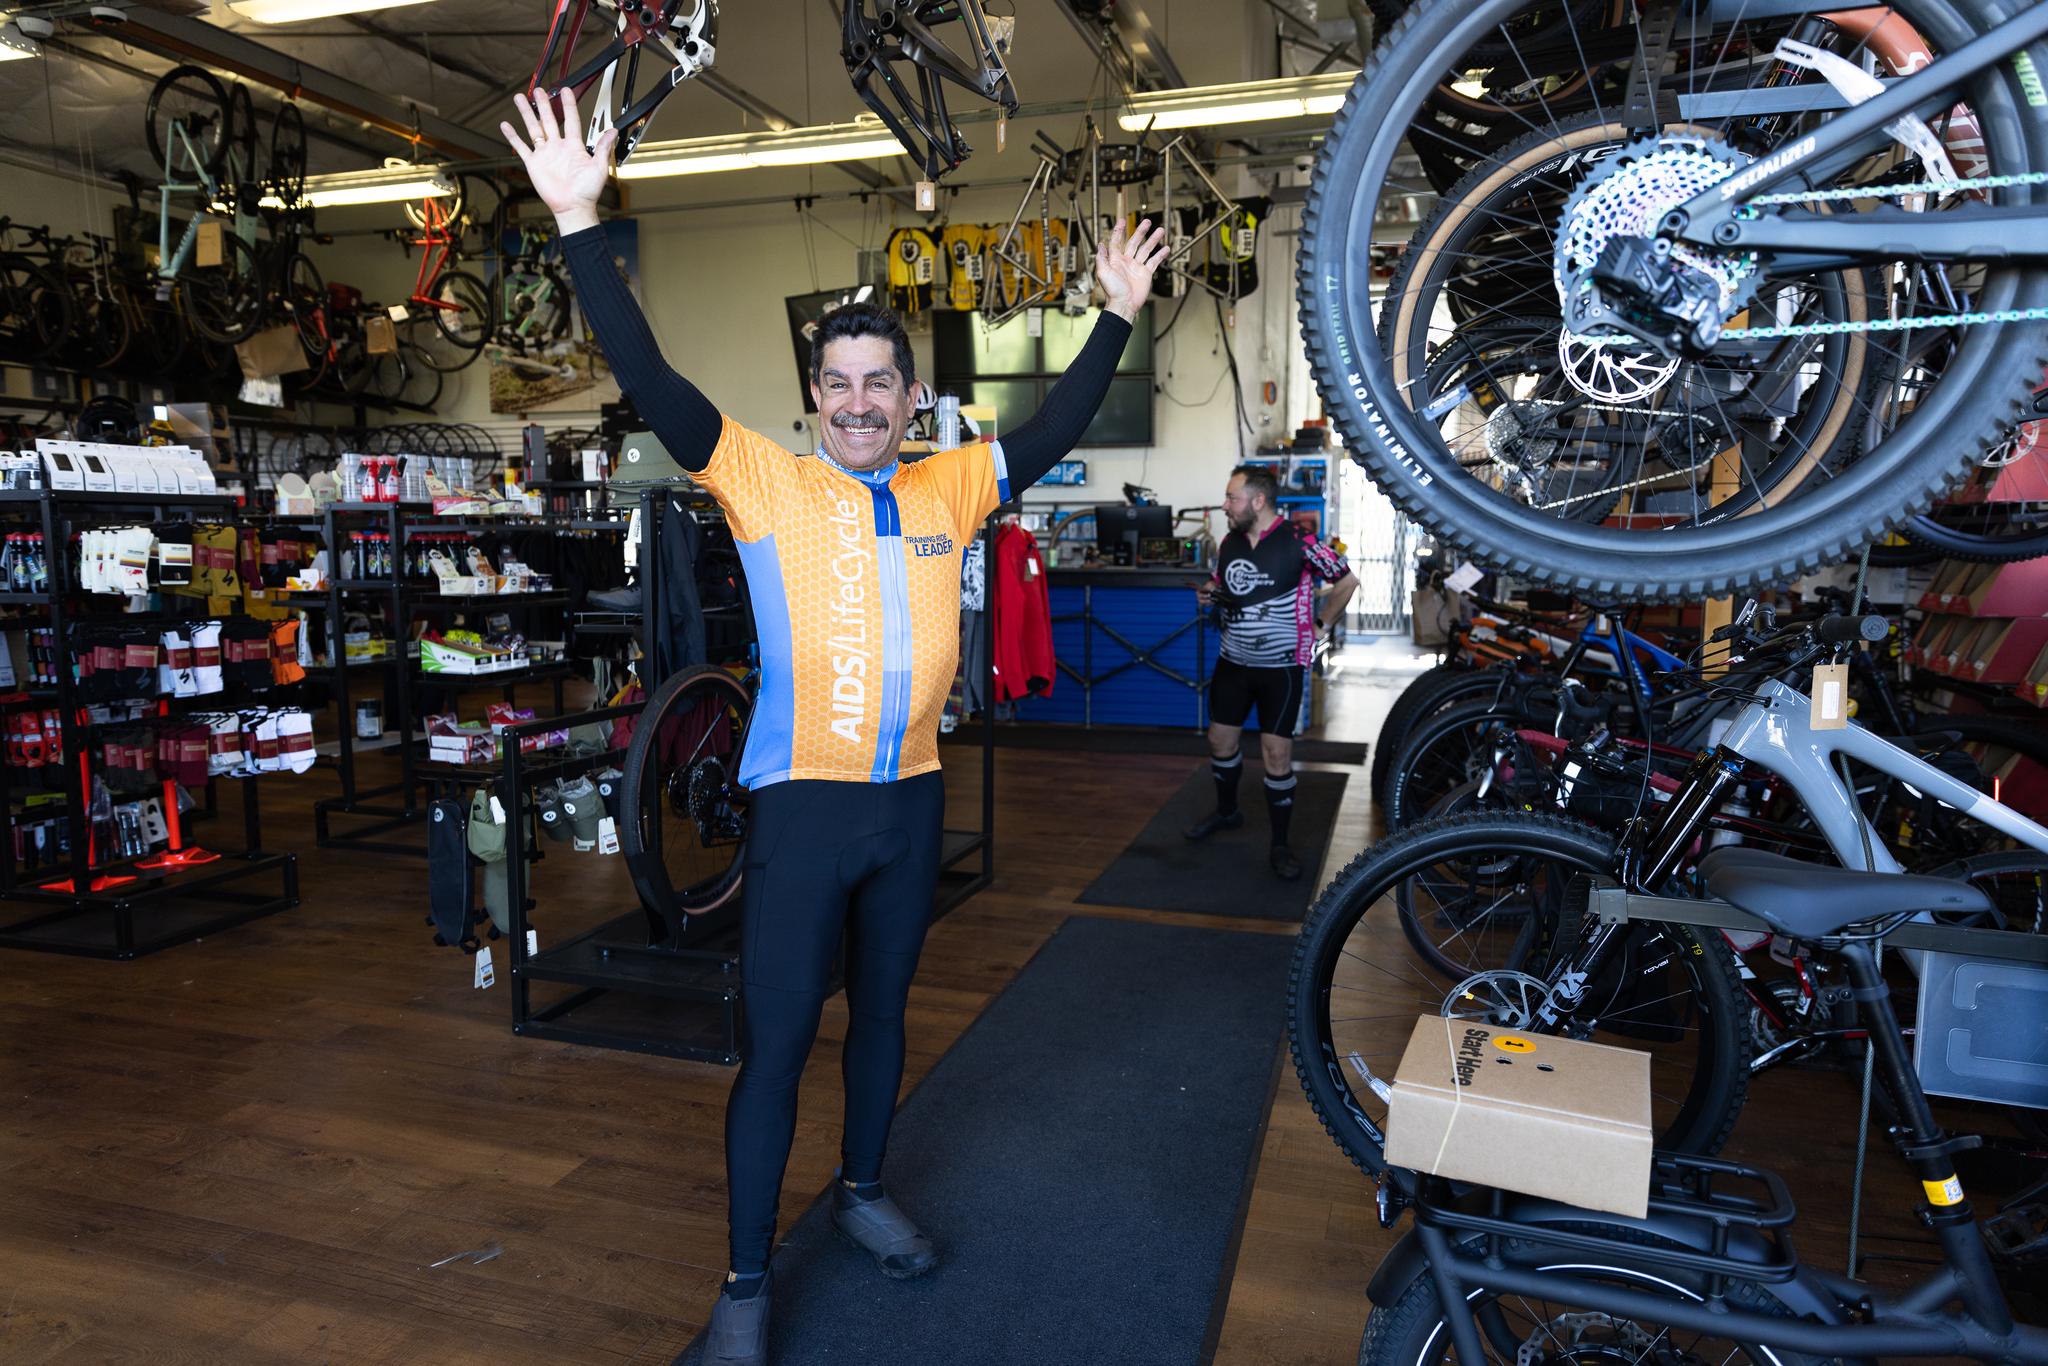 Alt Tag: A man with his hands raised welcomes visitors to Roaring Mouse Cycles in the Presidio. Photo by Myleen Hollero.